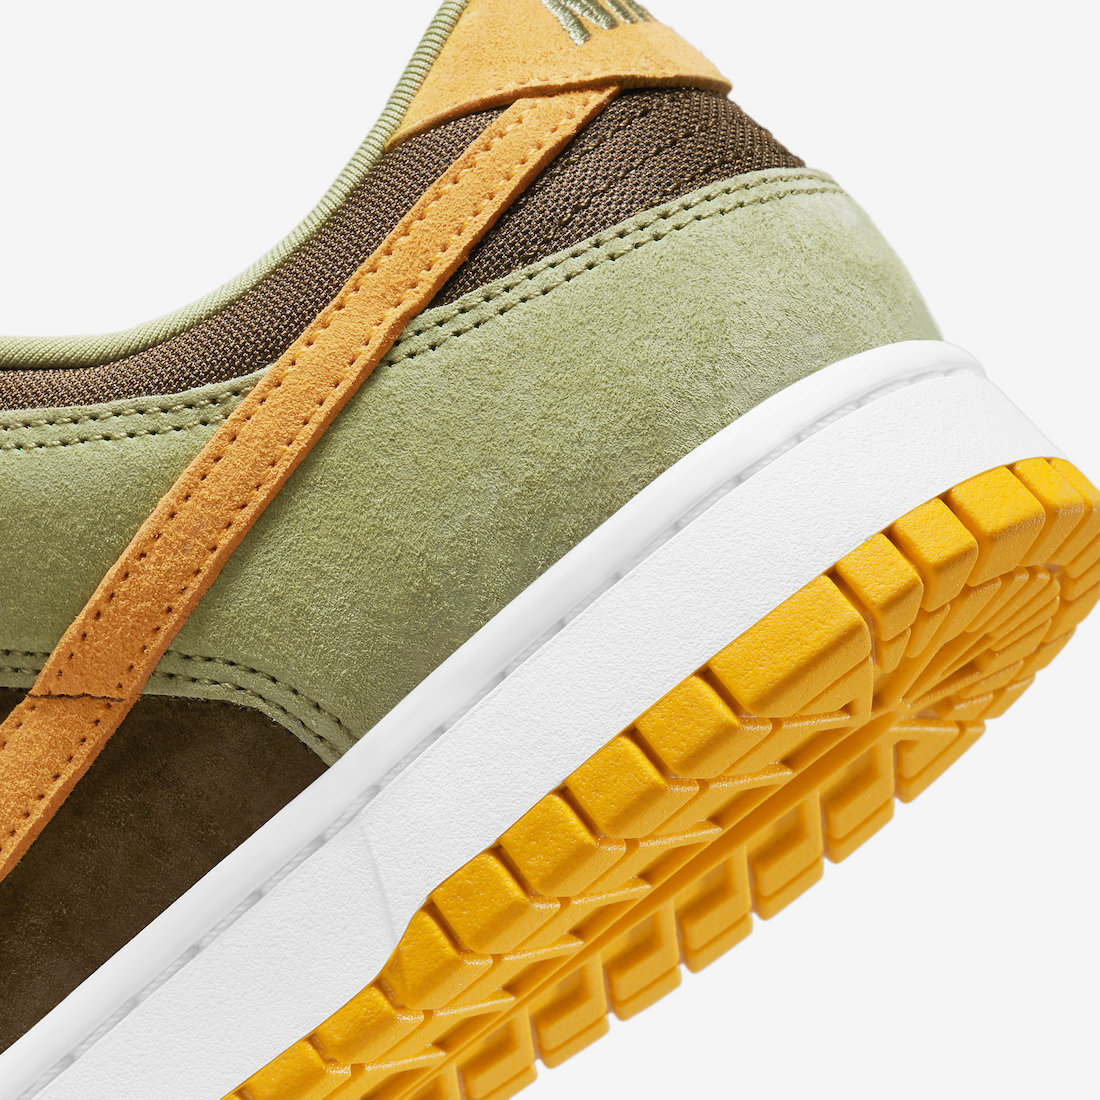 Nike Dunk Low Dusty Olive 2023 DH5360-300